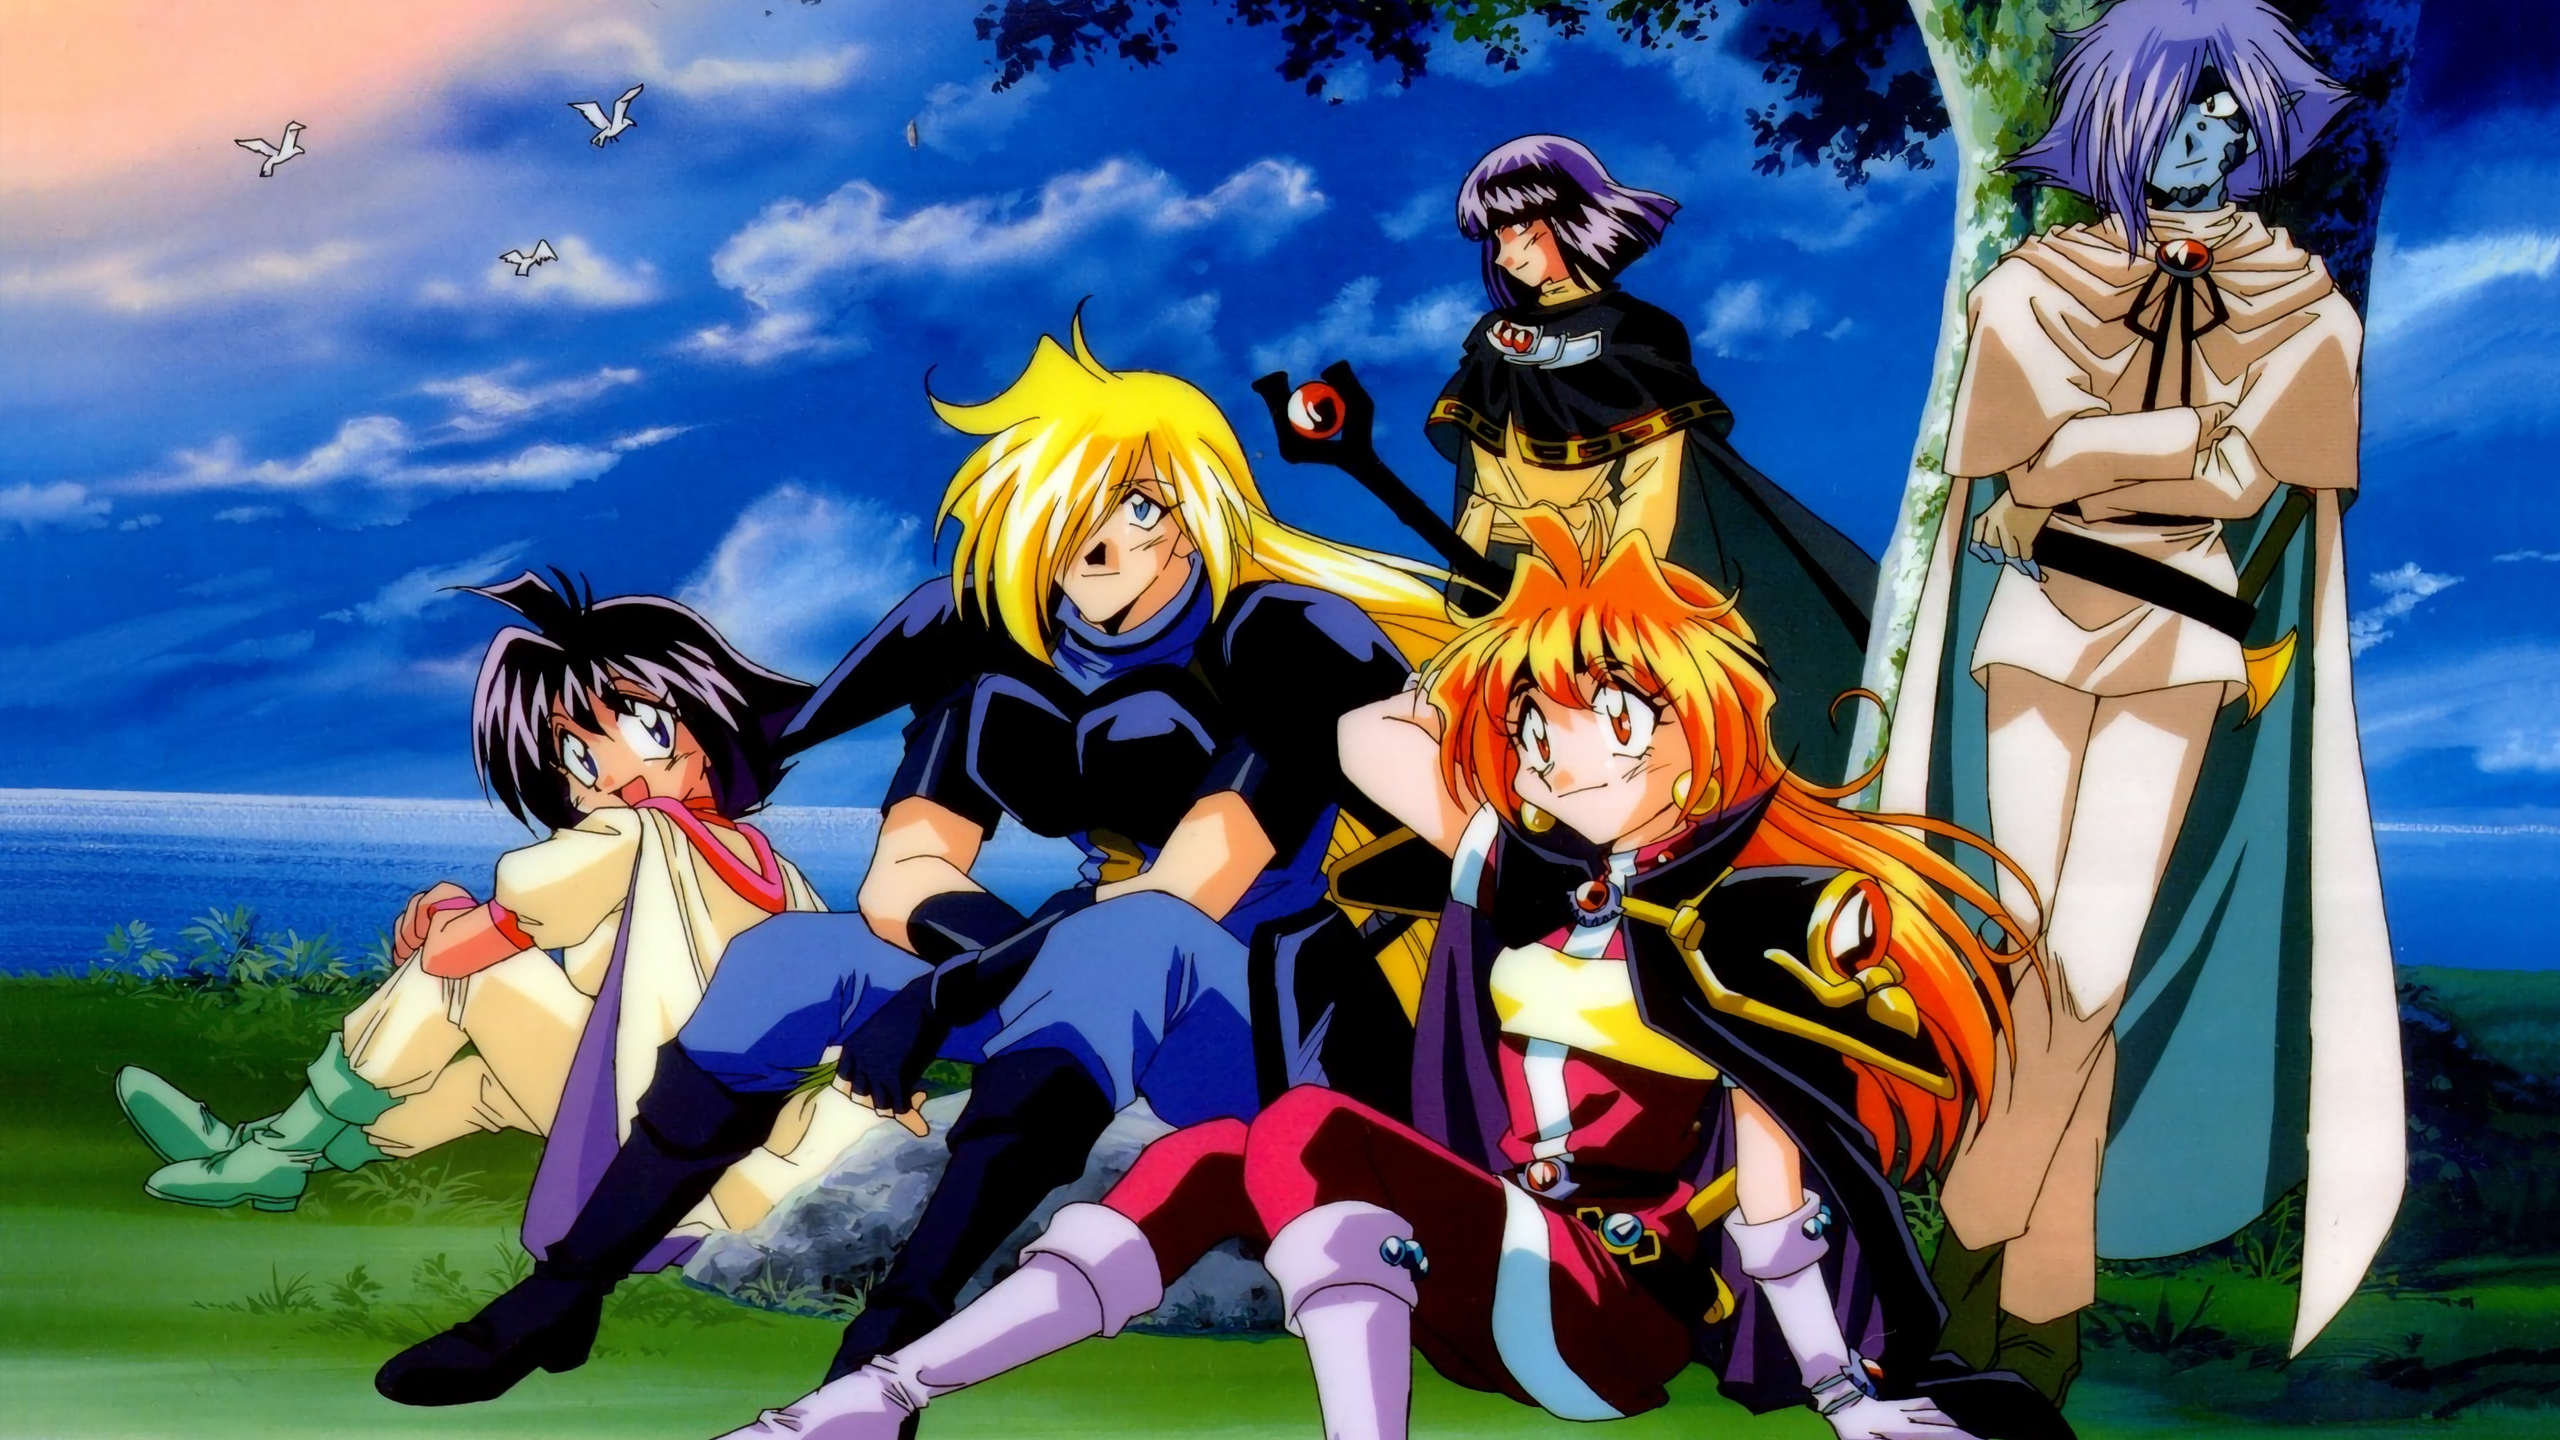 Slayers HD Wallpapers and Backgrounds. 